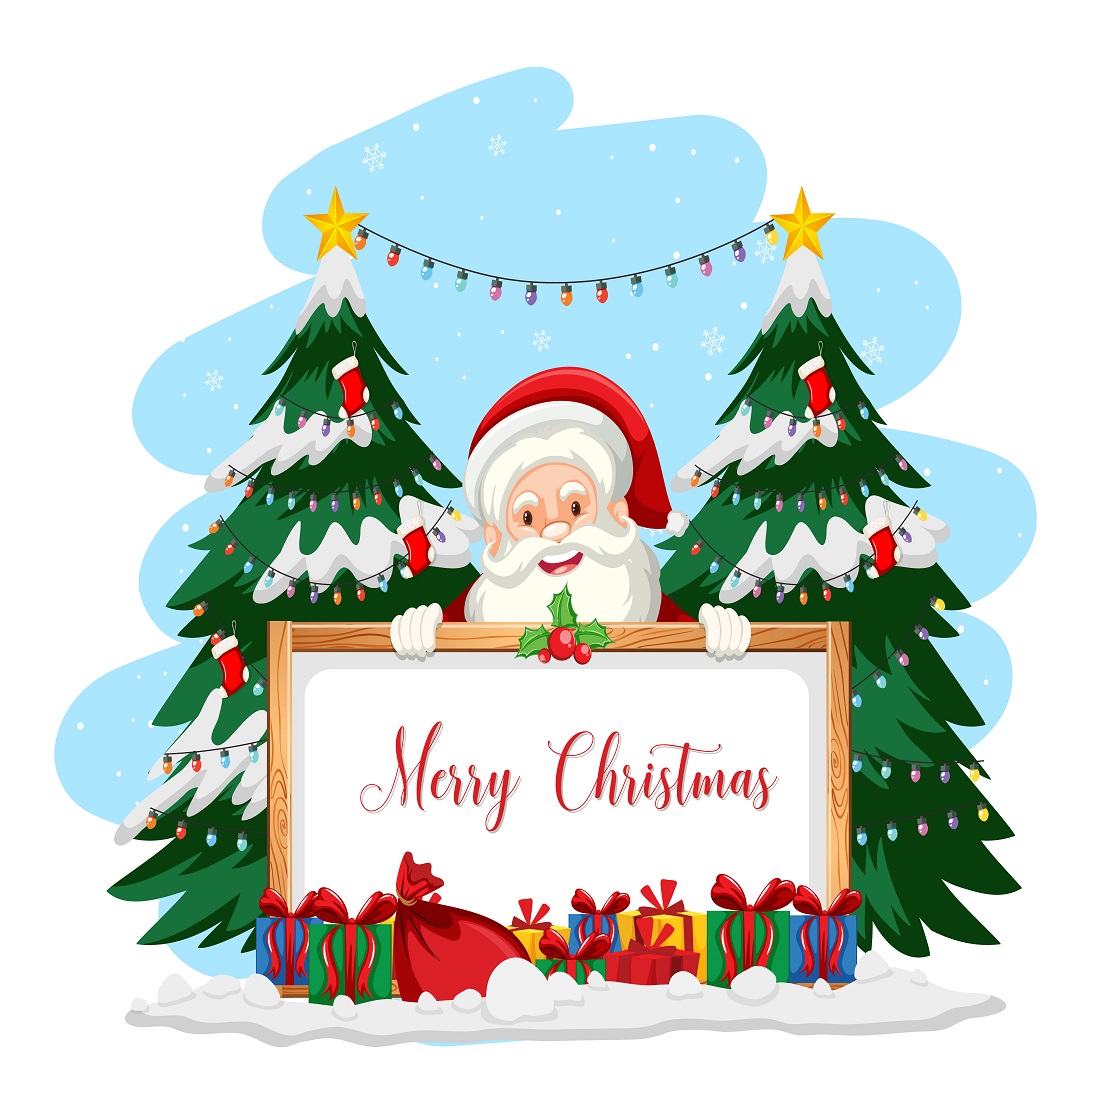 Santa Claus with merry Christmas preview image.